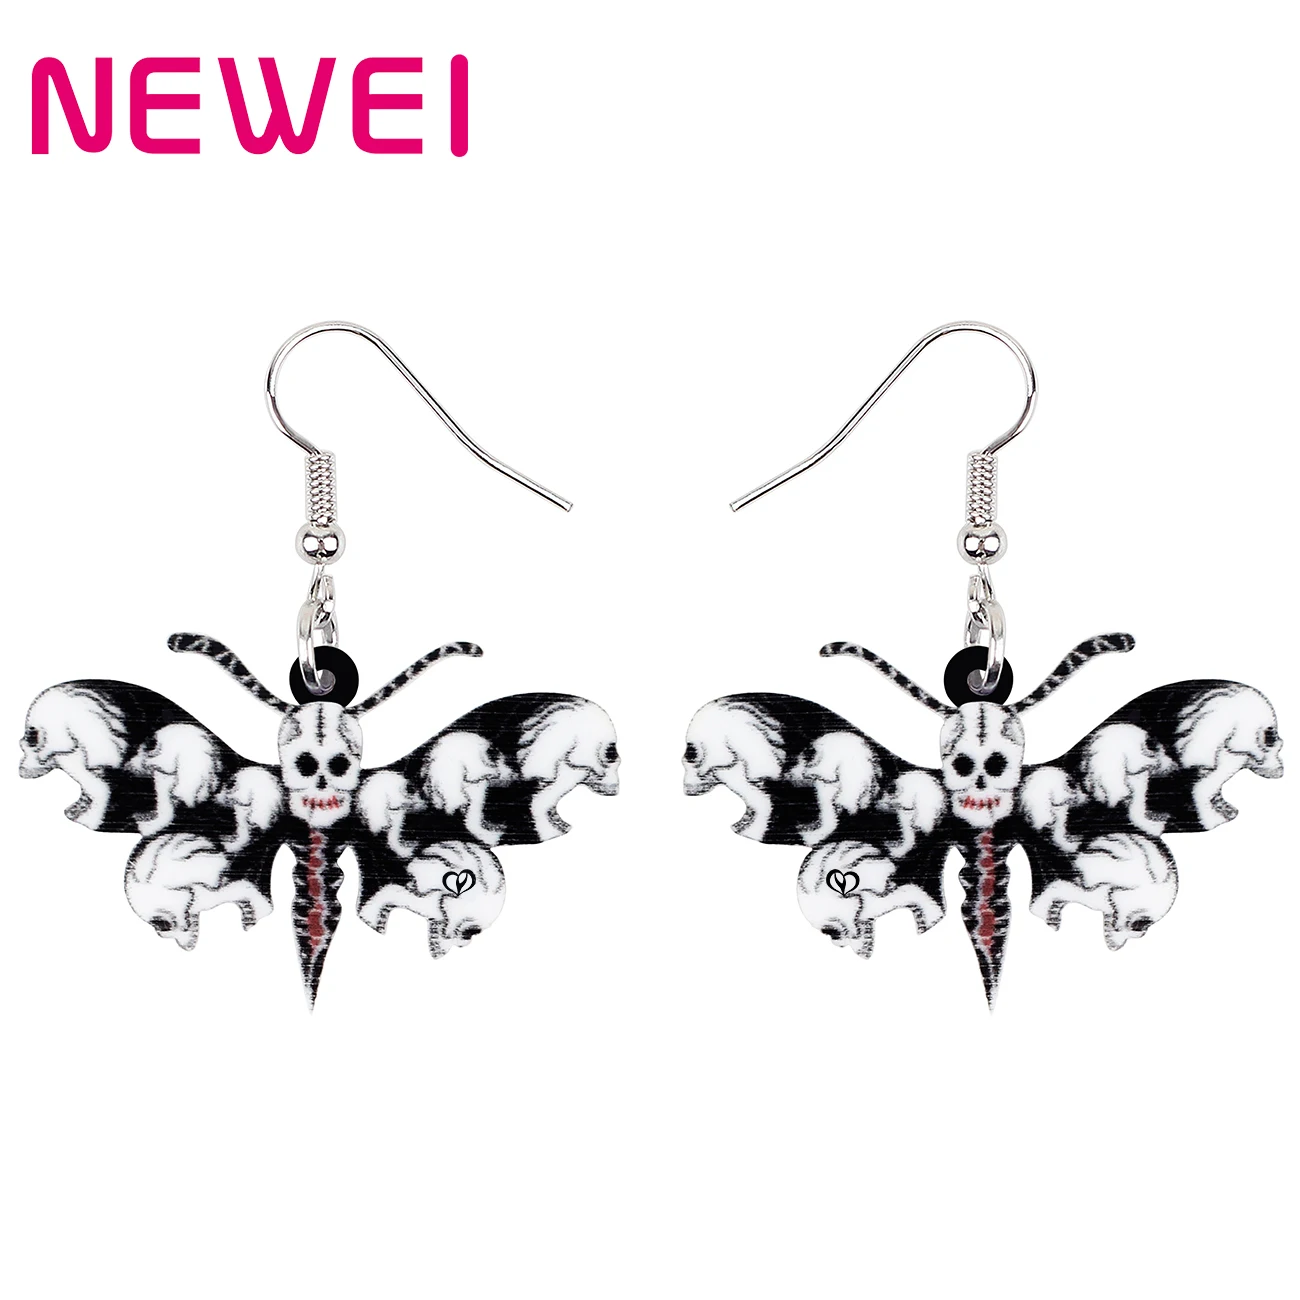 

Halloween Acrylic Skull Flying Butterfly Earrings Insects Dangle Drop Fashion Jewelry For Women Girls Teens Trendy Charms Gifts, White